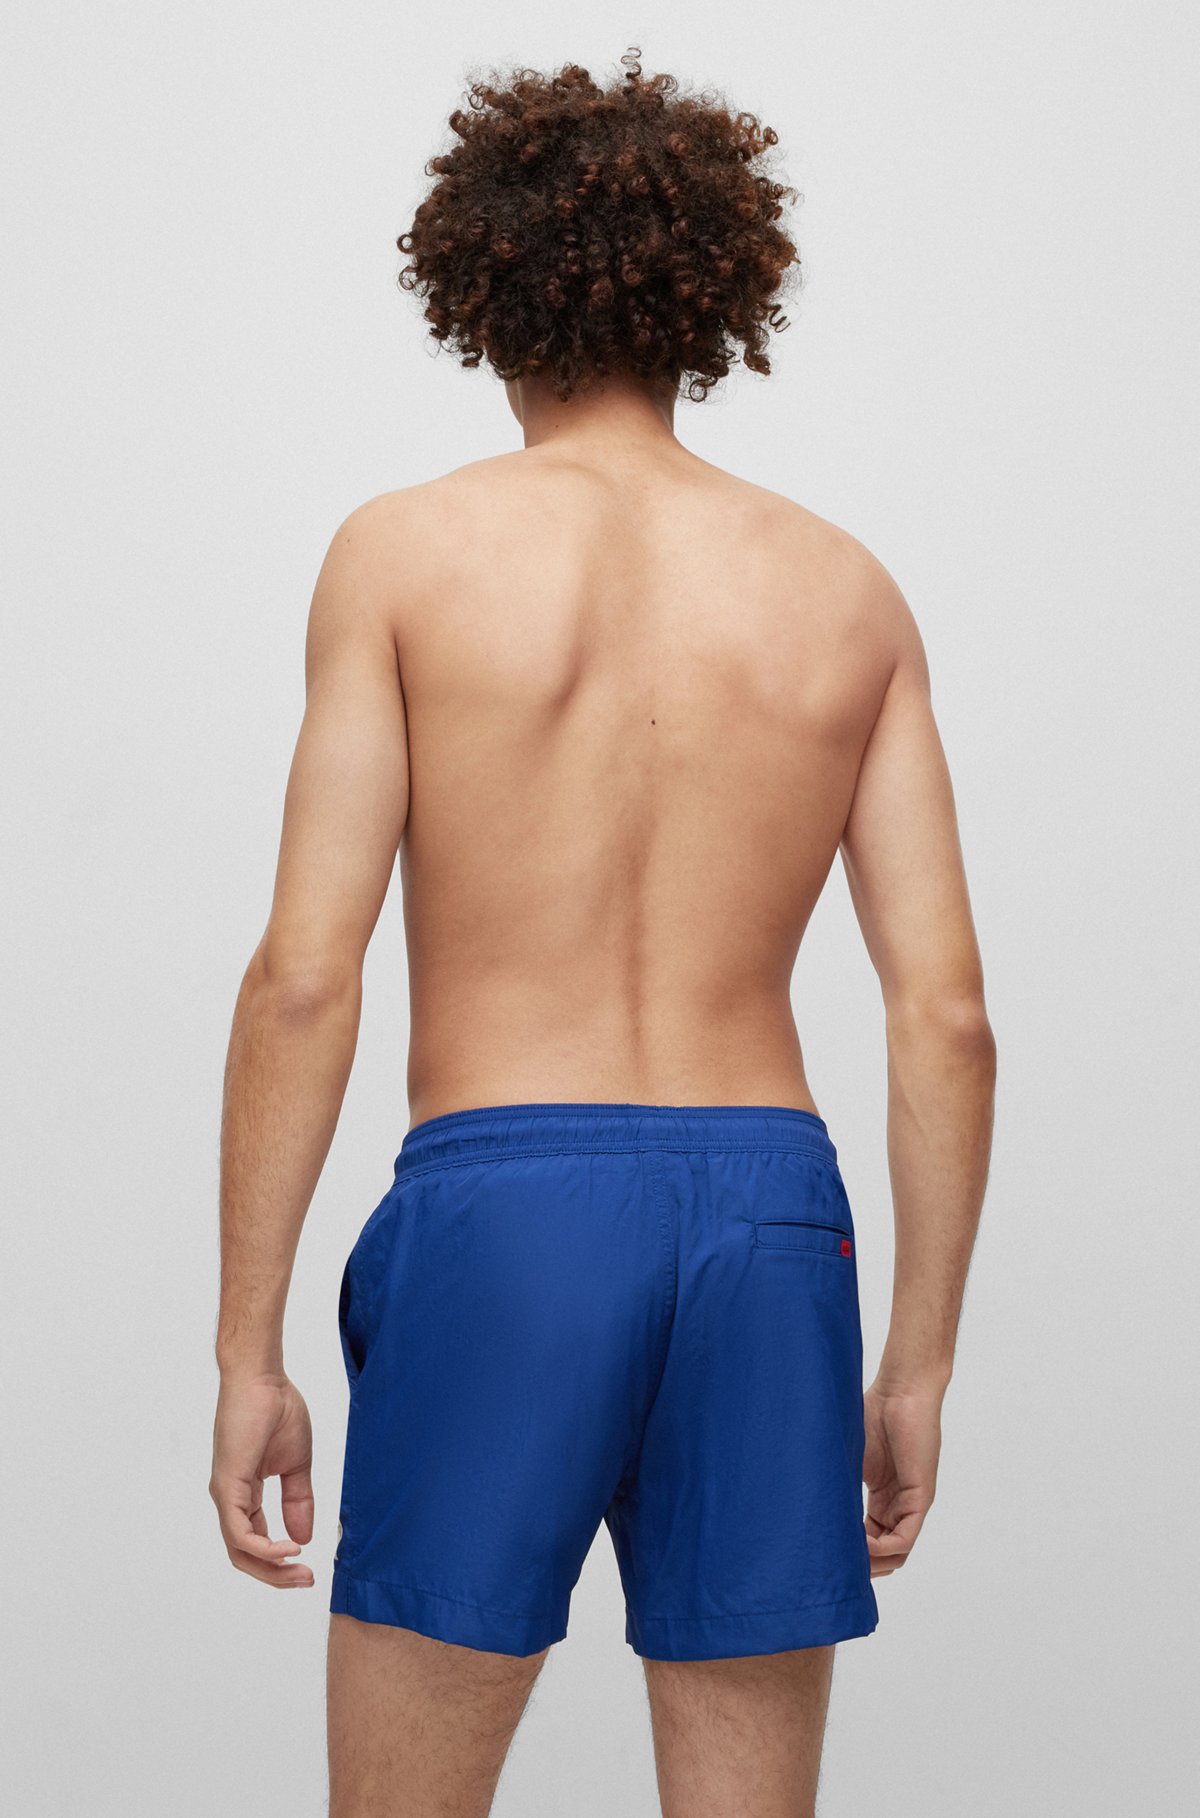 Quick-dry swim shorts with red logo label, Blue